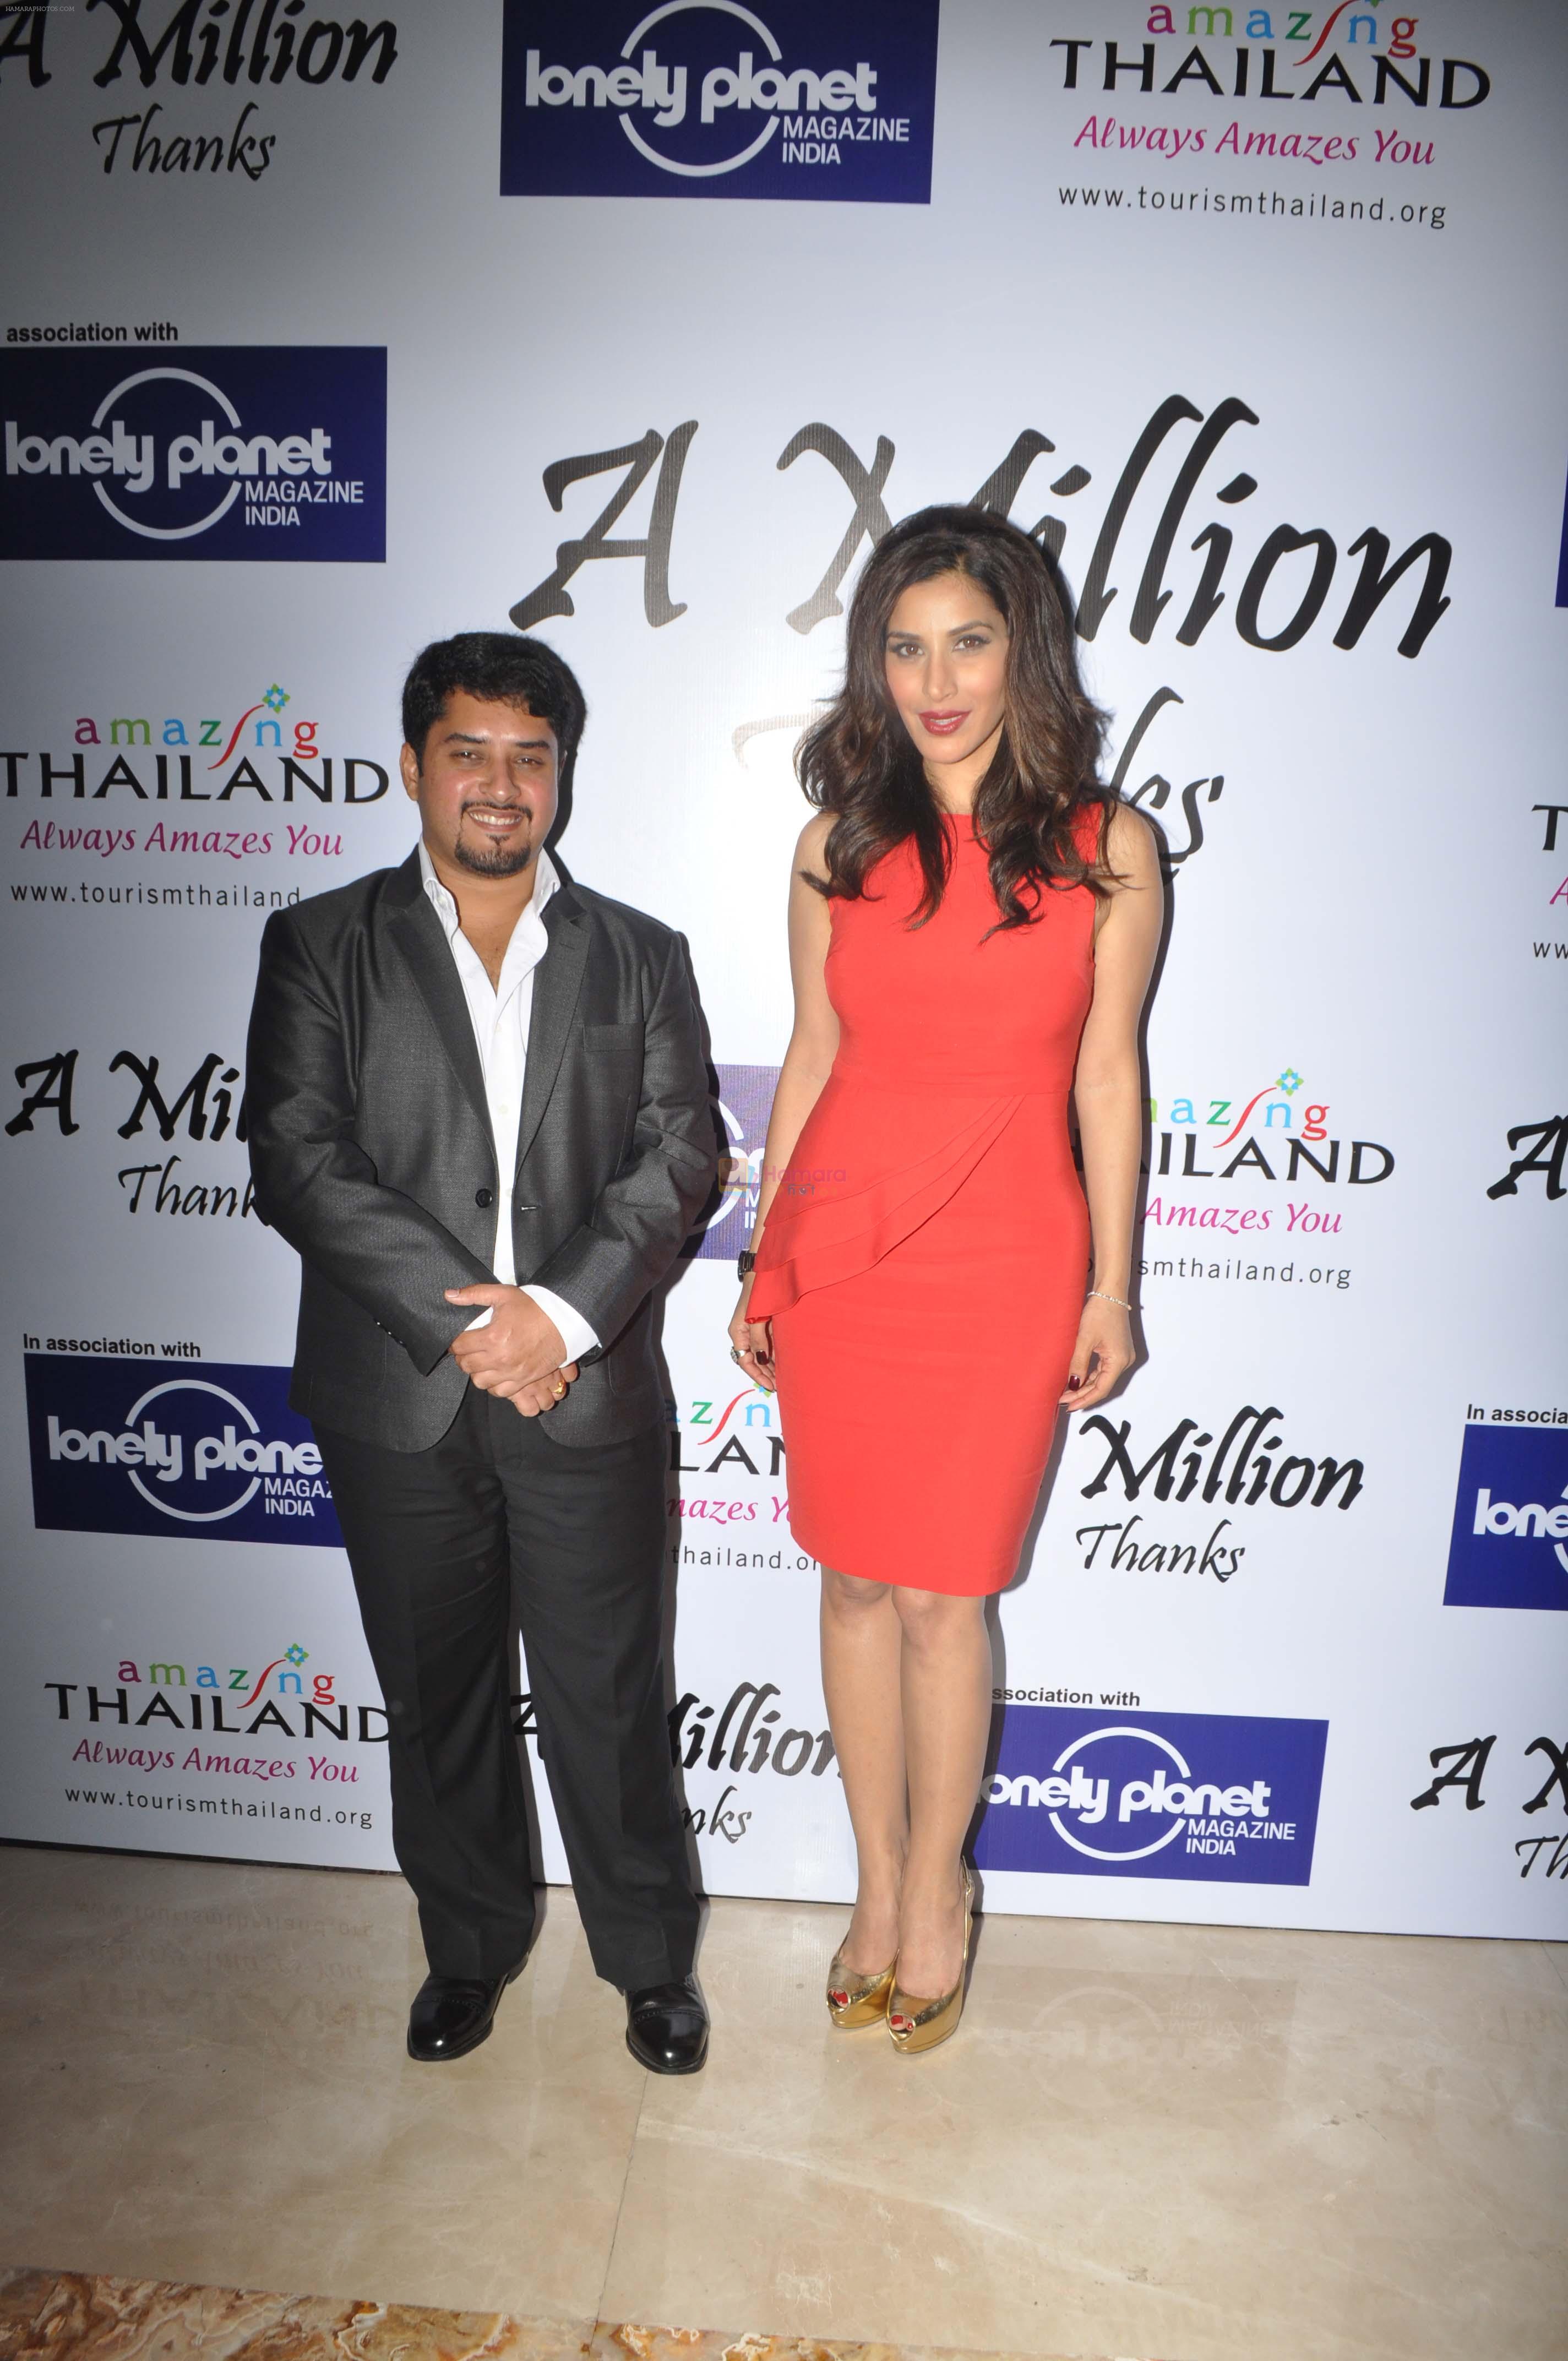 Sophie Chaudhary at A Million Thanks Evening Event Presented by Lonely Planet & Thailand Tourism at Shangri La in Mumbai on 22nd March 2013